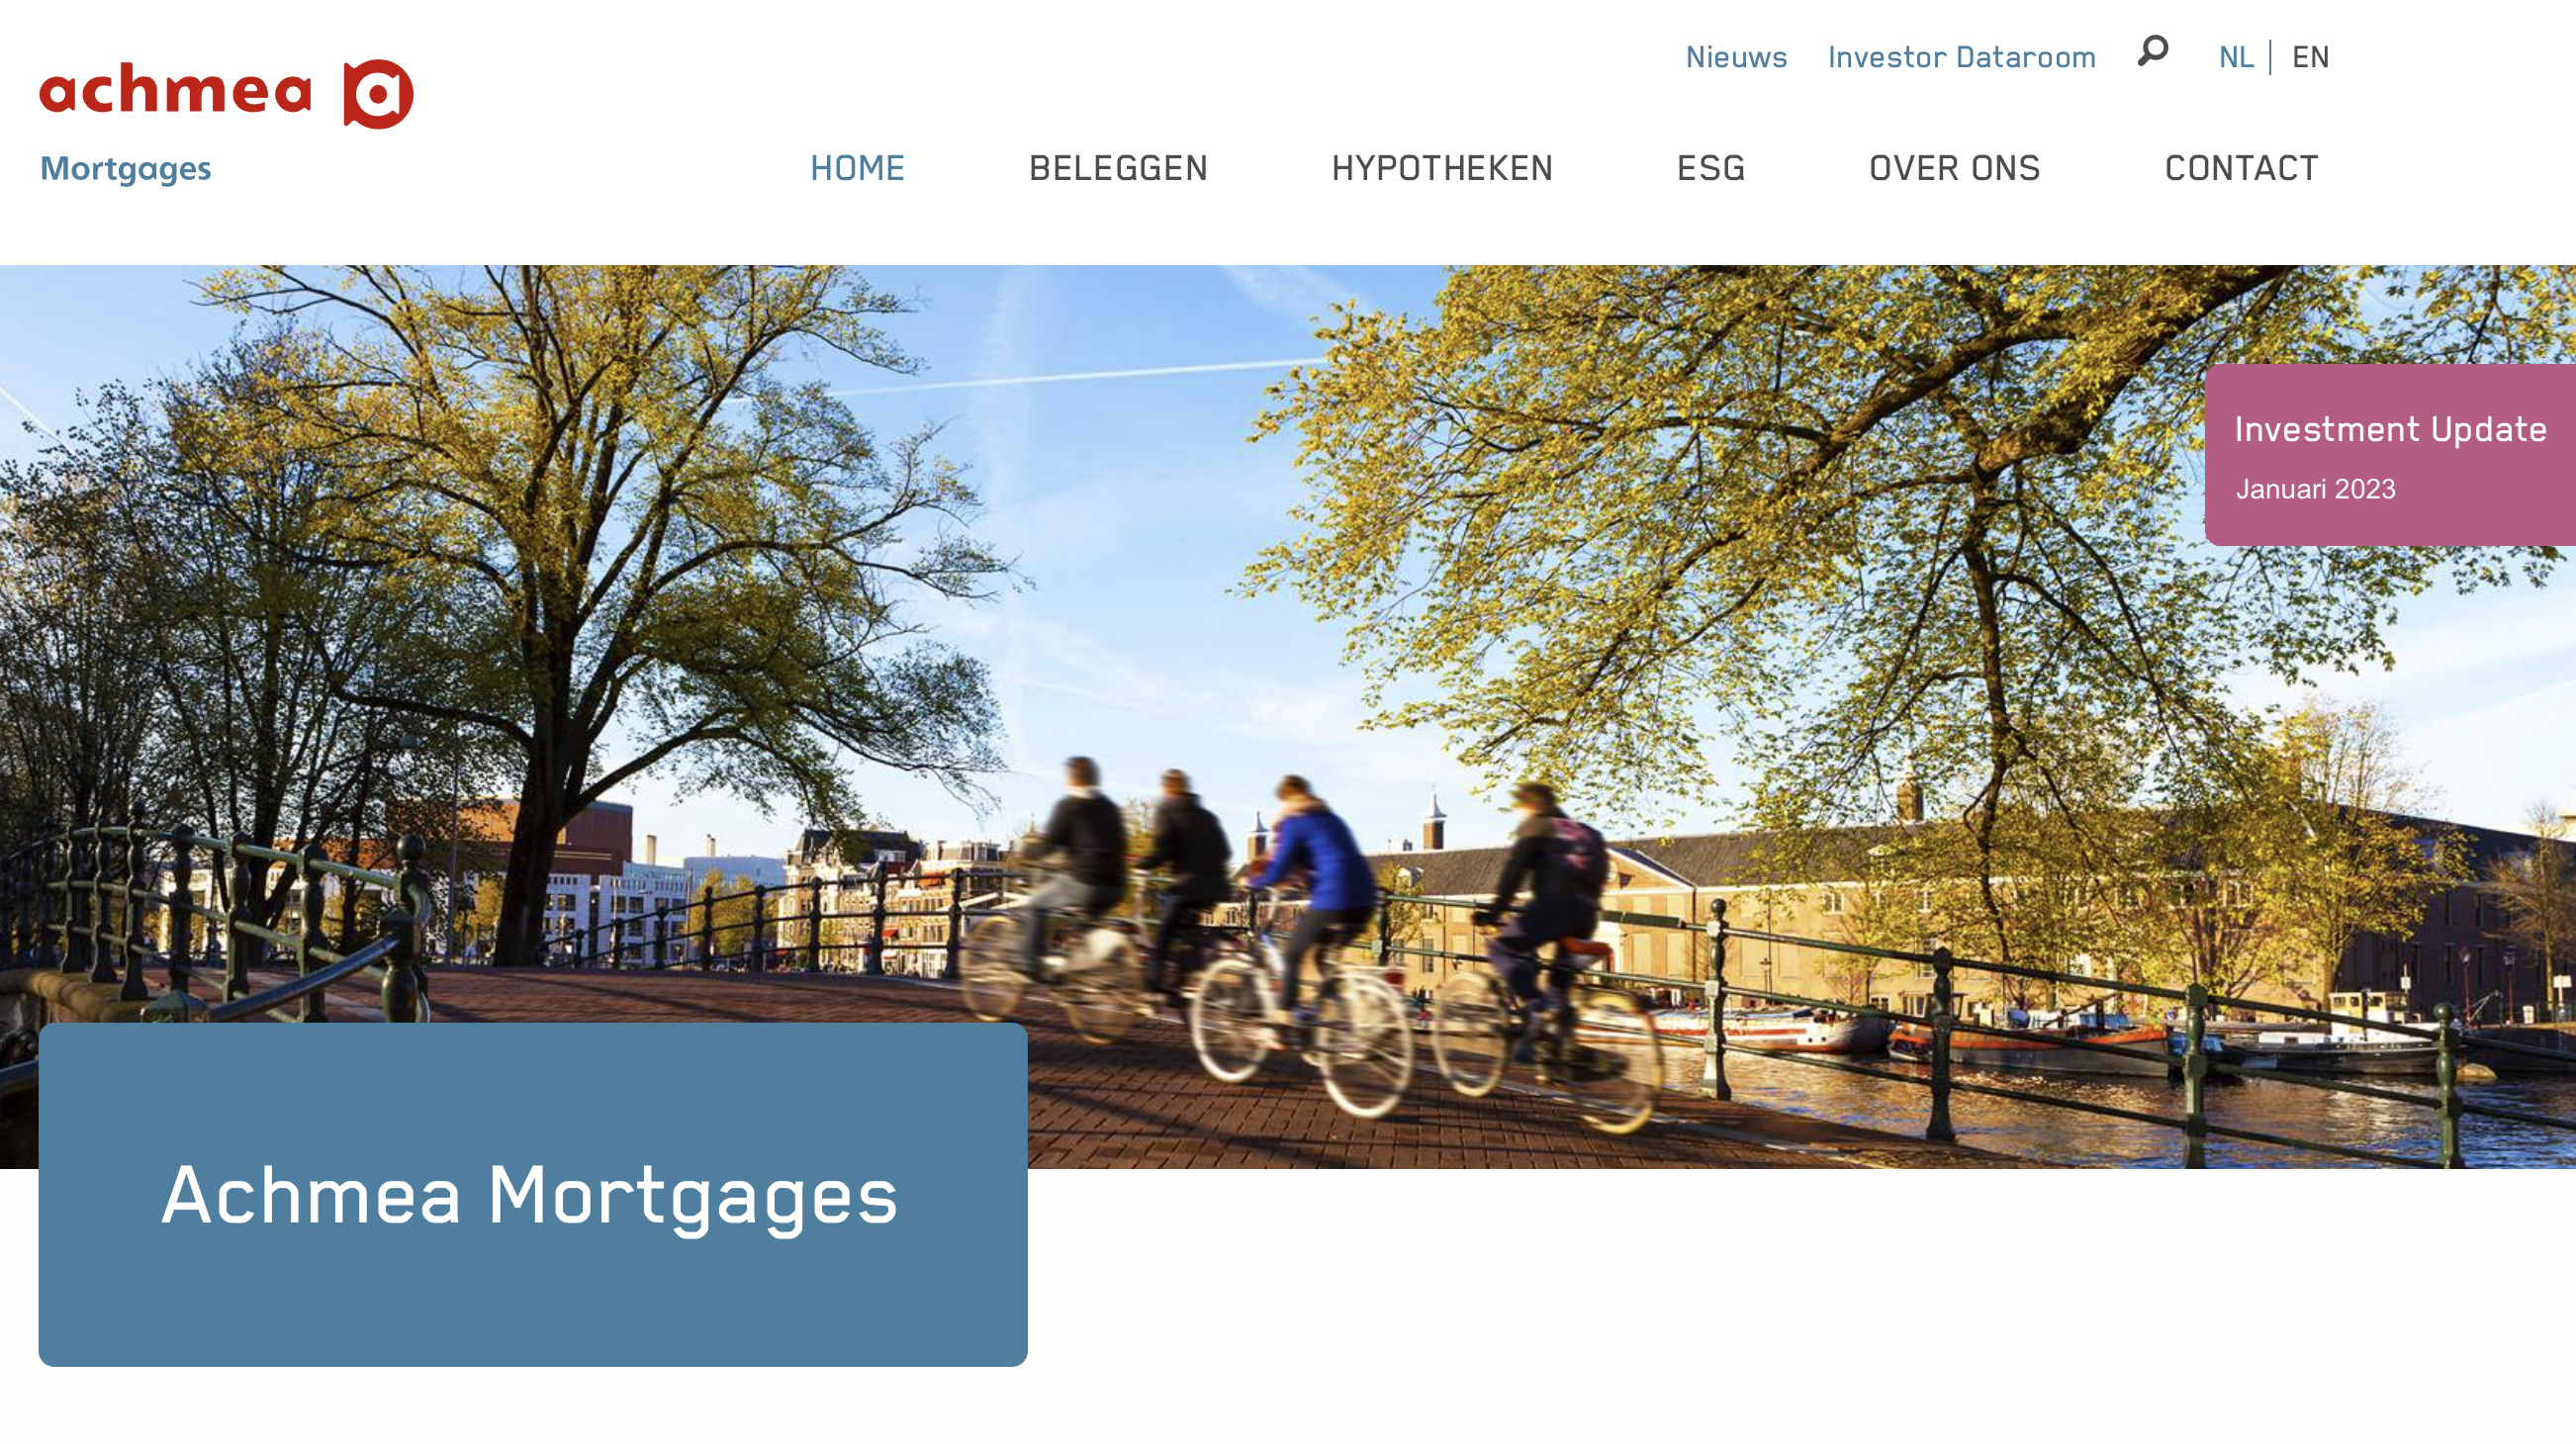 https://margowestgeest.nl/wp-content/uploads/2023/06/Achmea-Mortgages.png